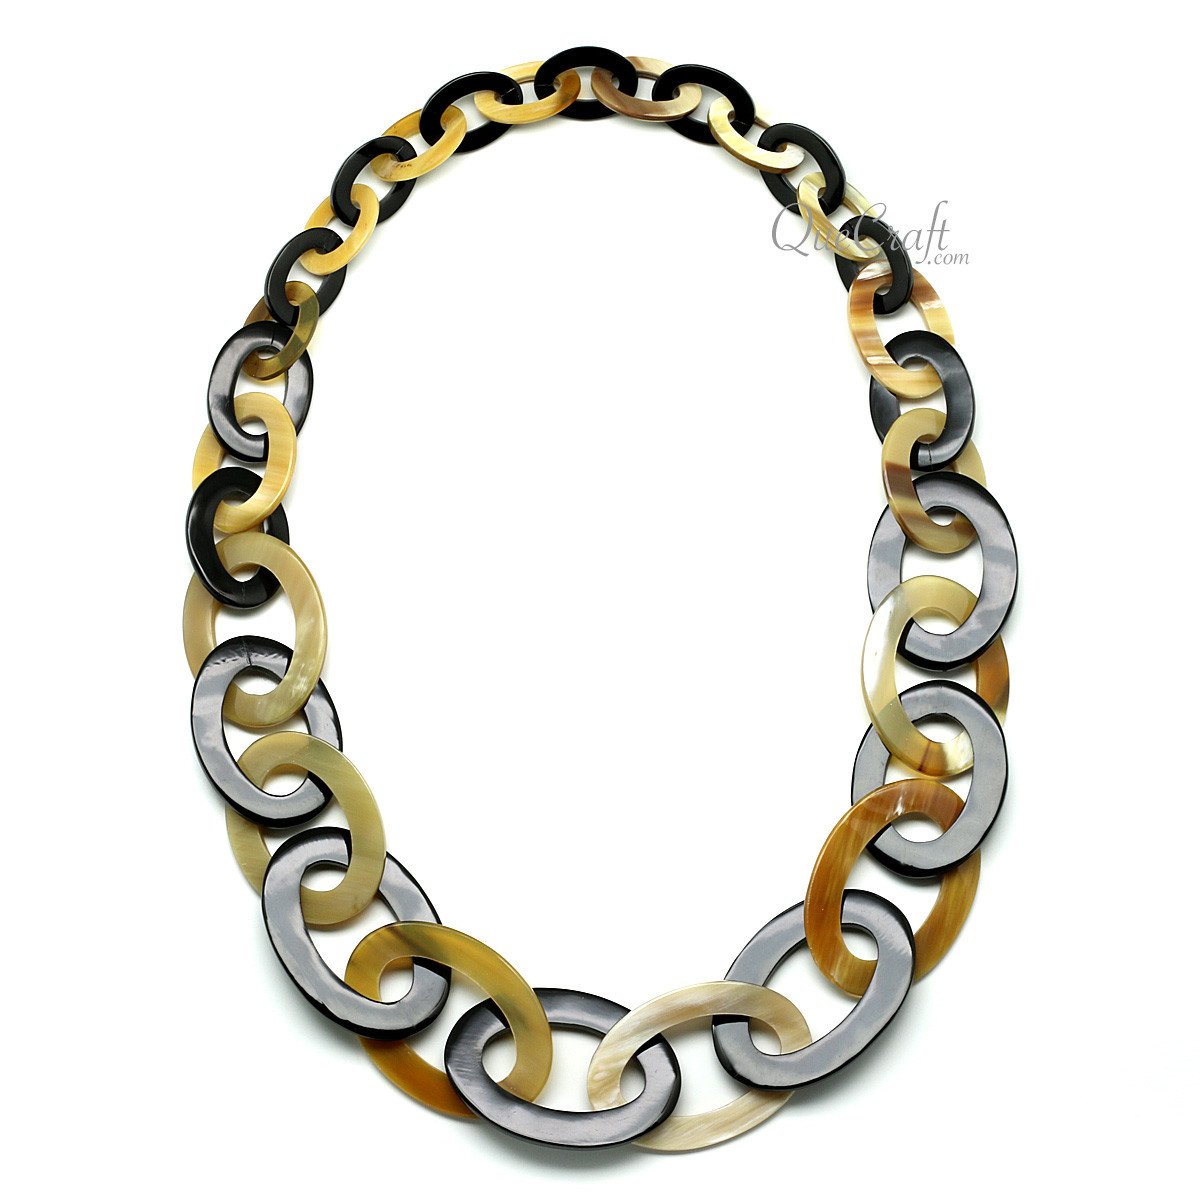 Horn Chain Necklace #11892 - HORN JEWELRY